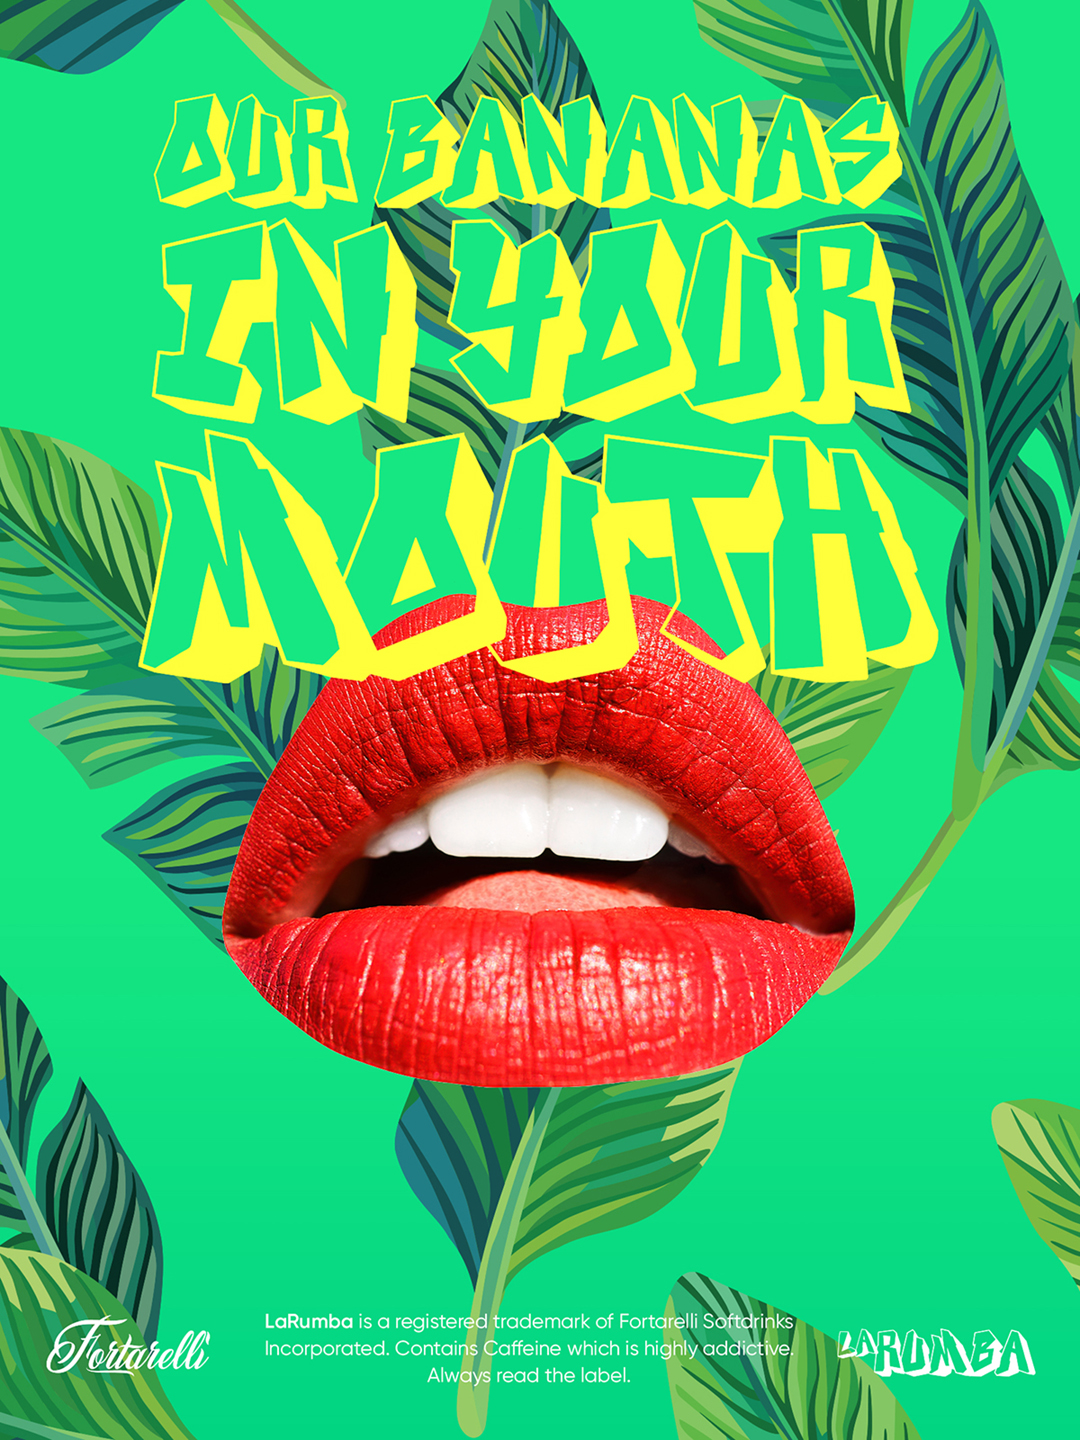 An advertising campaign poster for a soft drinks brand featuring red lips and banana leaves.